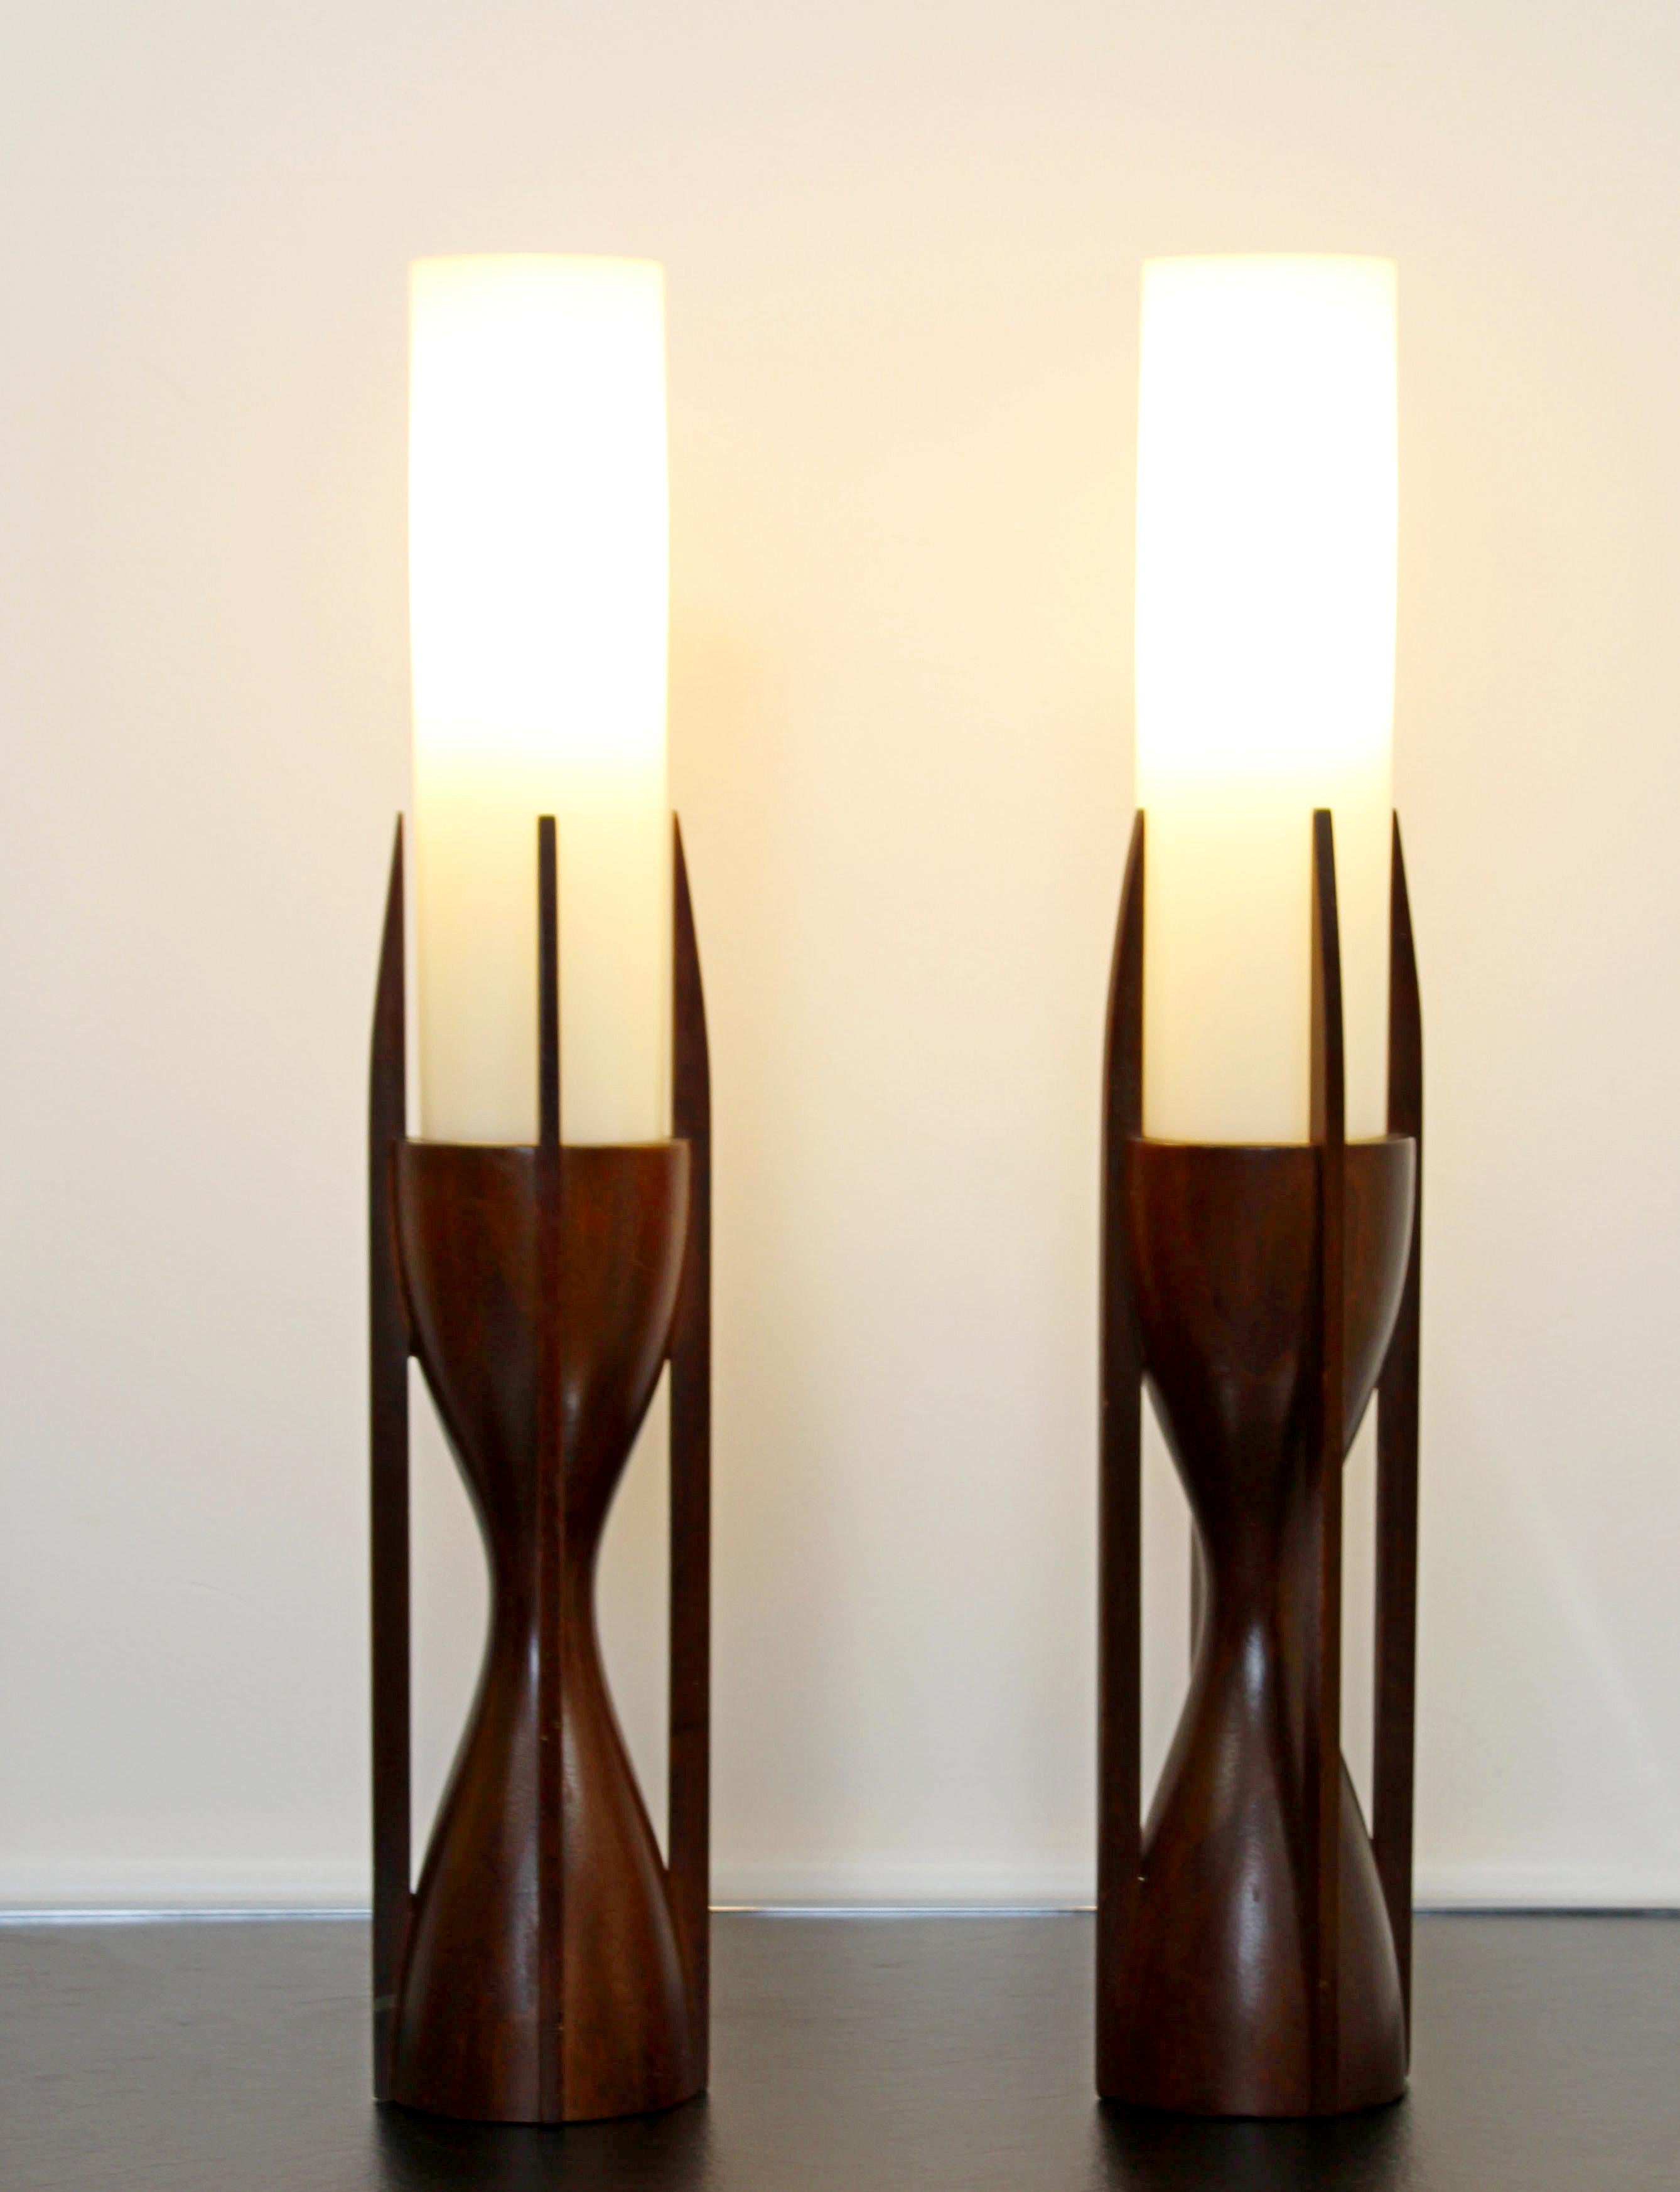 For your consideration is a gorgeous, small pair of mahogany wood and glass table lamps, in a sculptural hourglass shape, by Modeline Lamp Co, circa the 1960s. In very good condition. The dimensions are 3.5